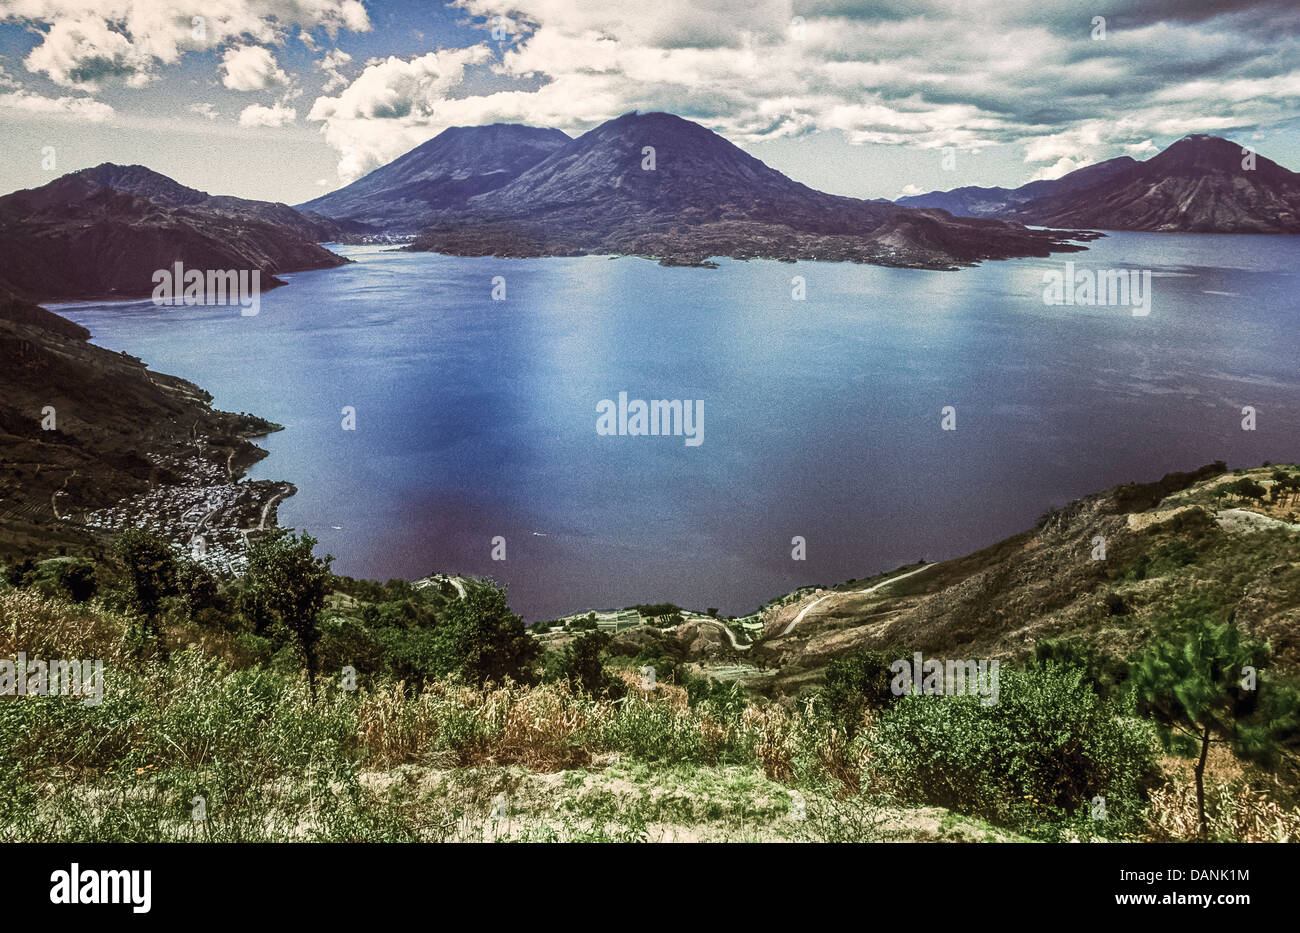 Scenic view of Lake Atitlan, Guatemala, from the Eastern shore showing all three volcanoes, Toliman, Atitlan, and San Pedro. Stock Photo